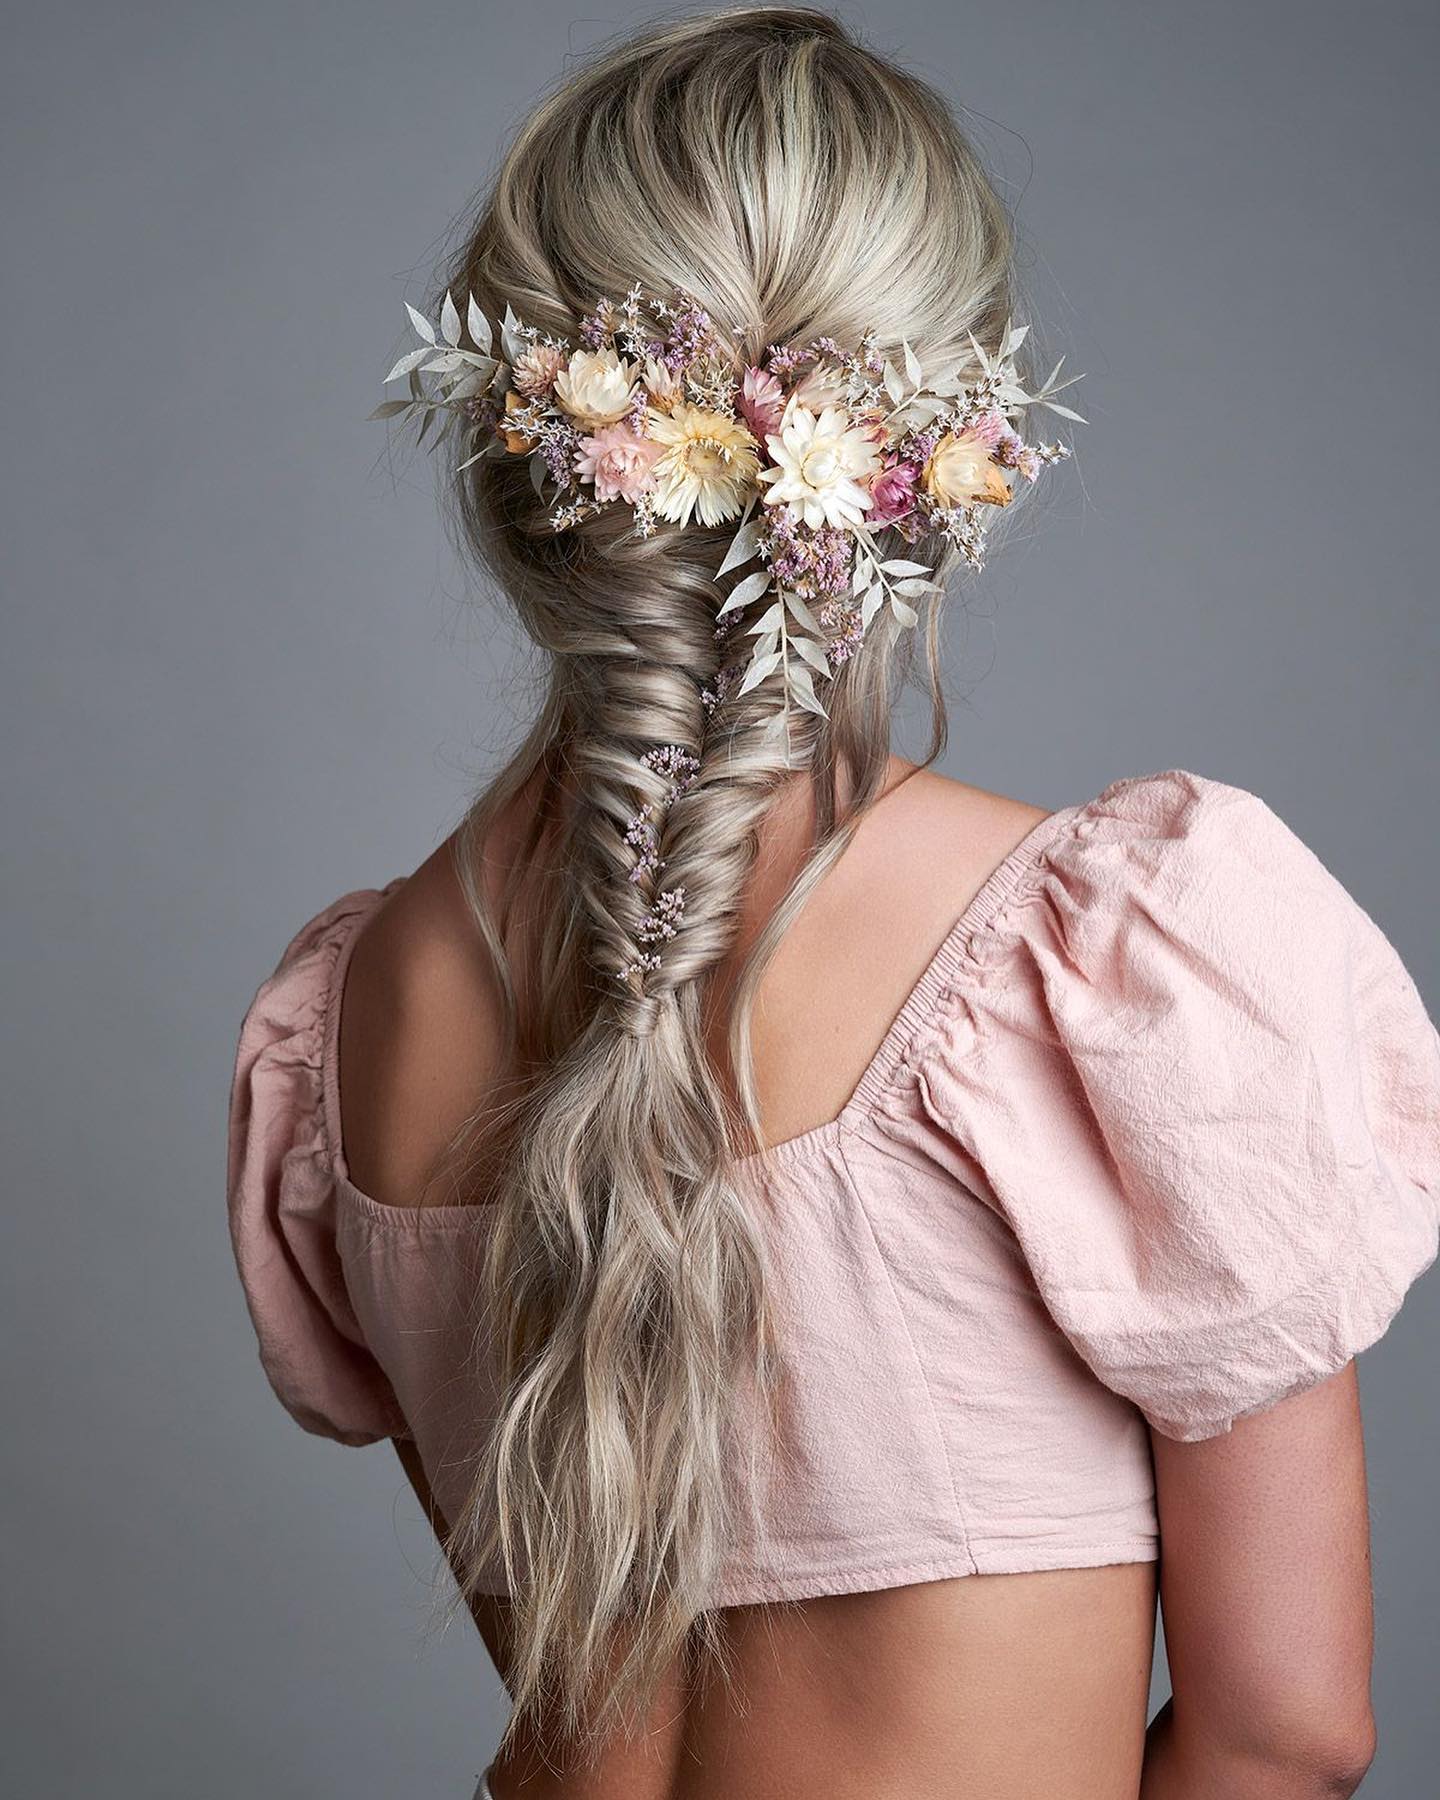 Artful Fishtail Braids With Flowers